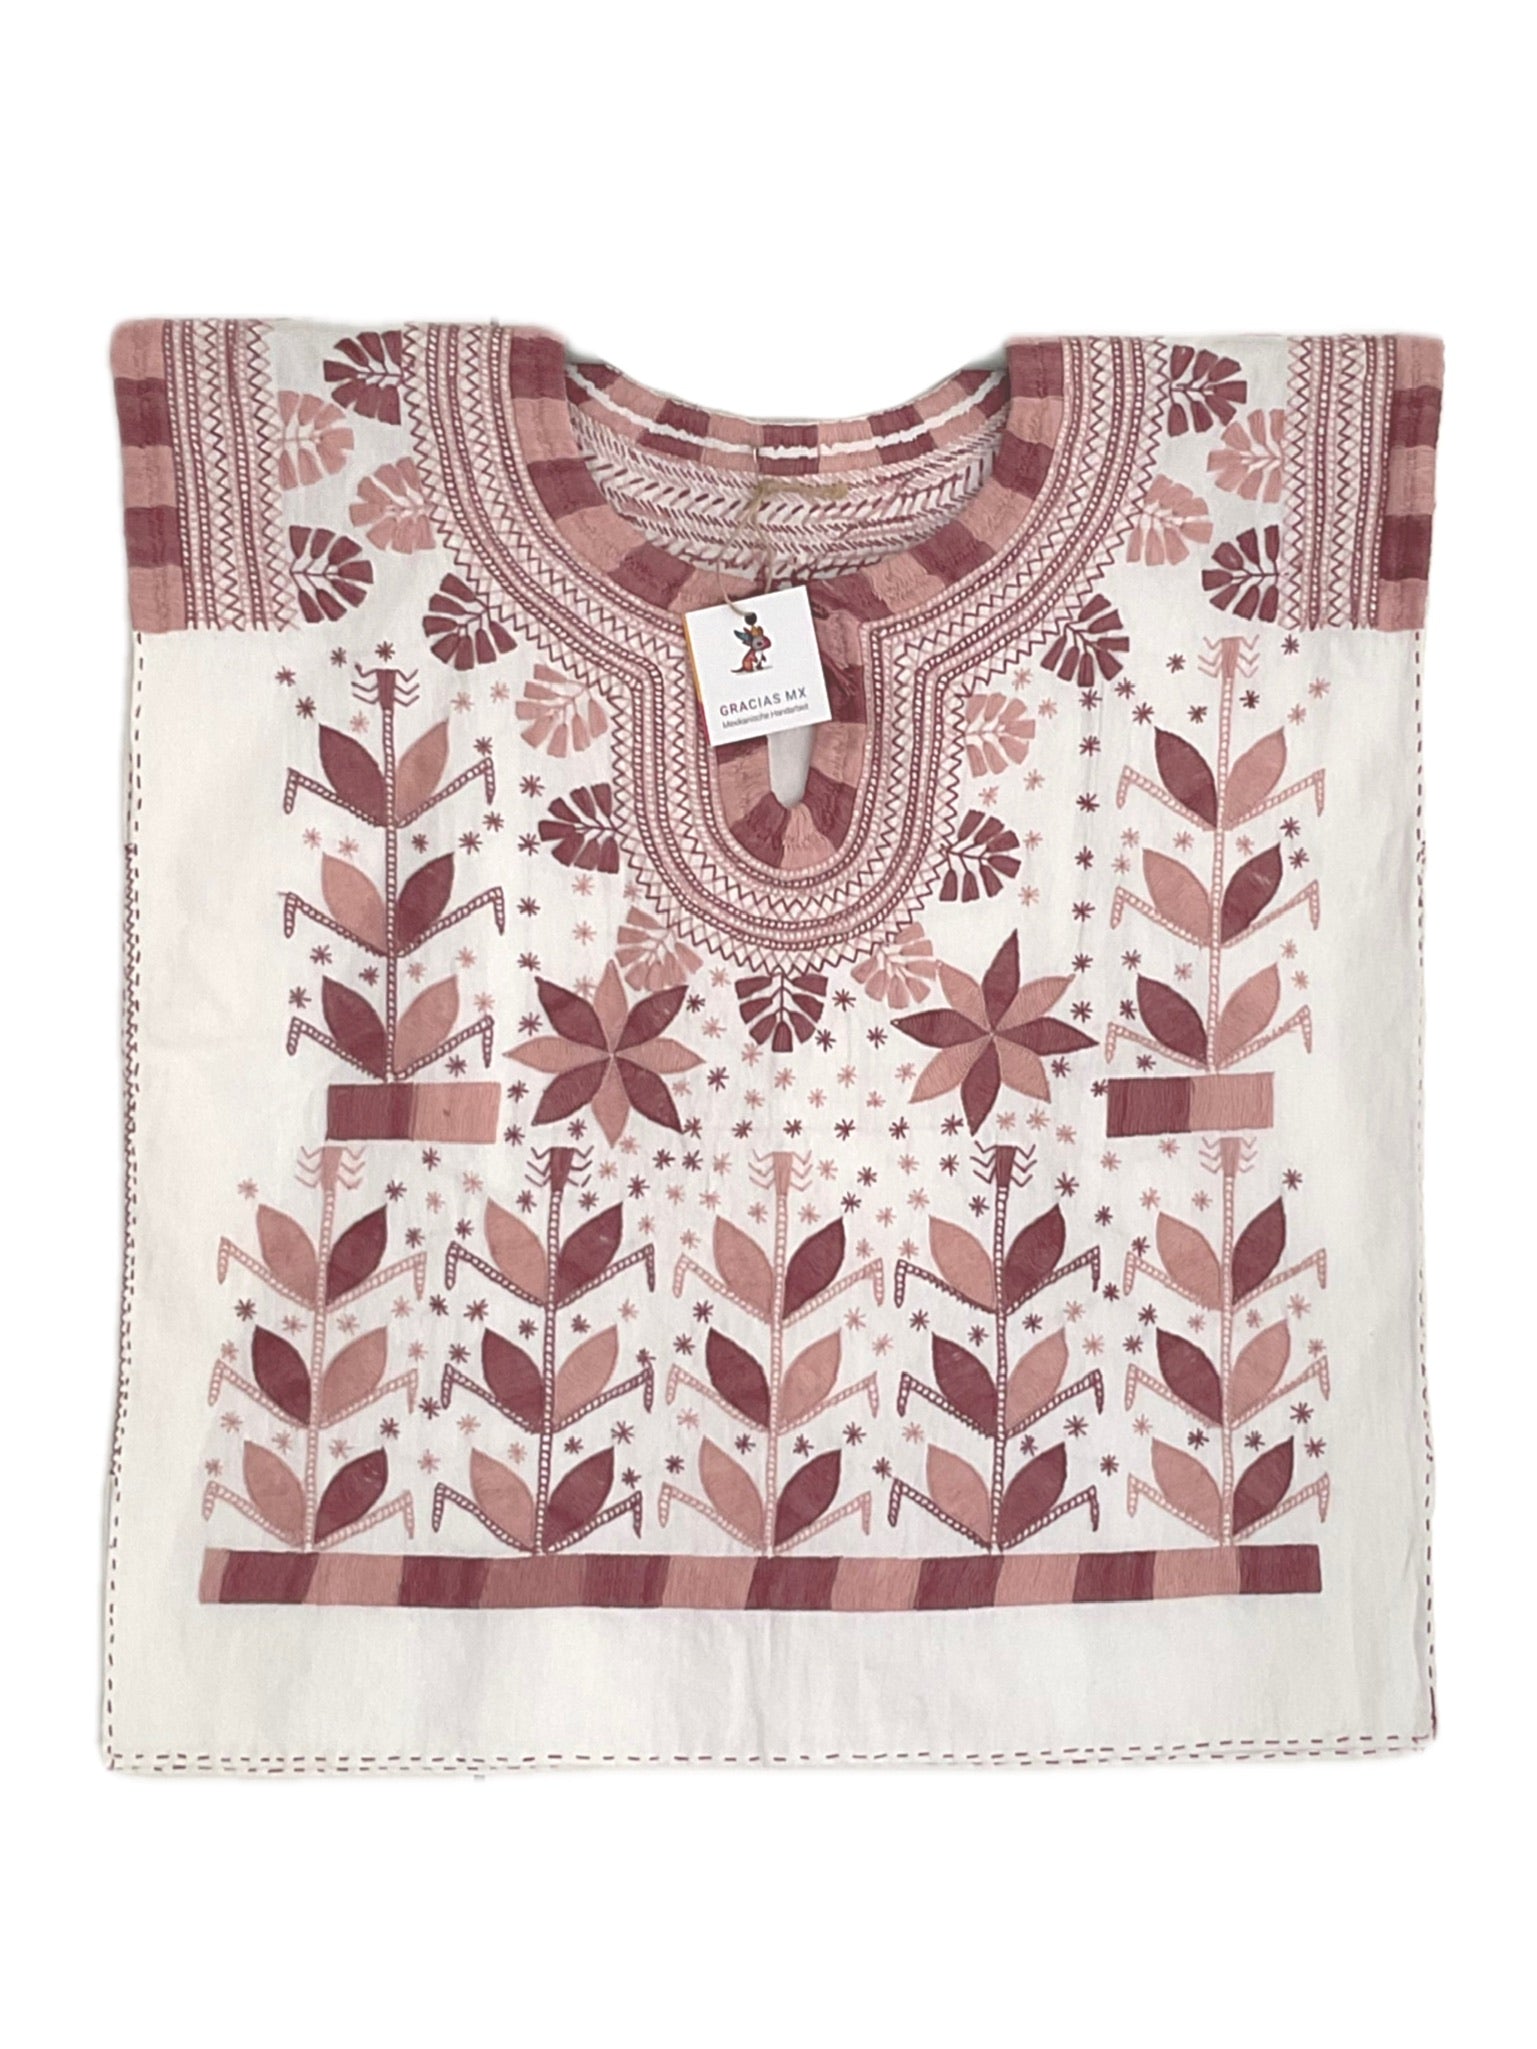 Hand embroidered blouse in dusty pink tones flat